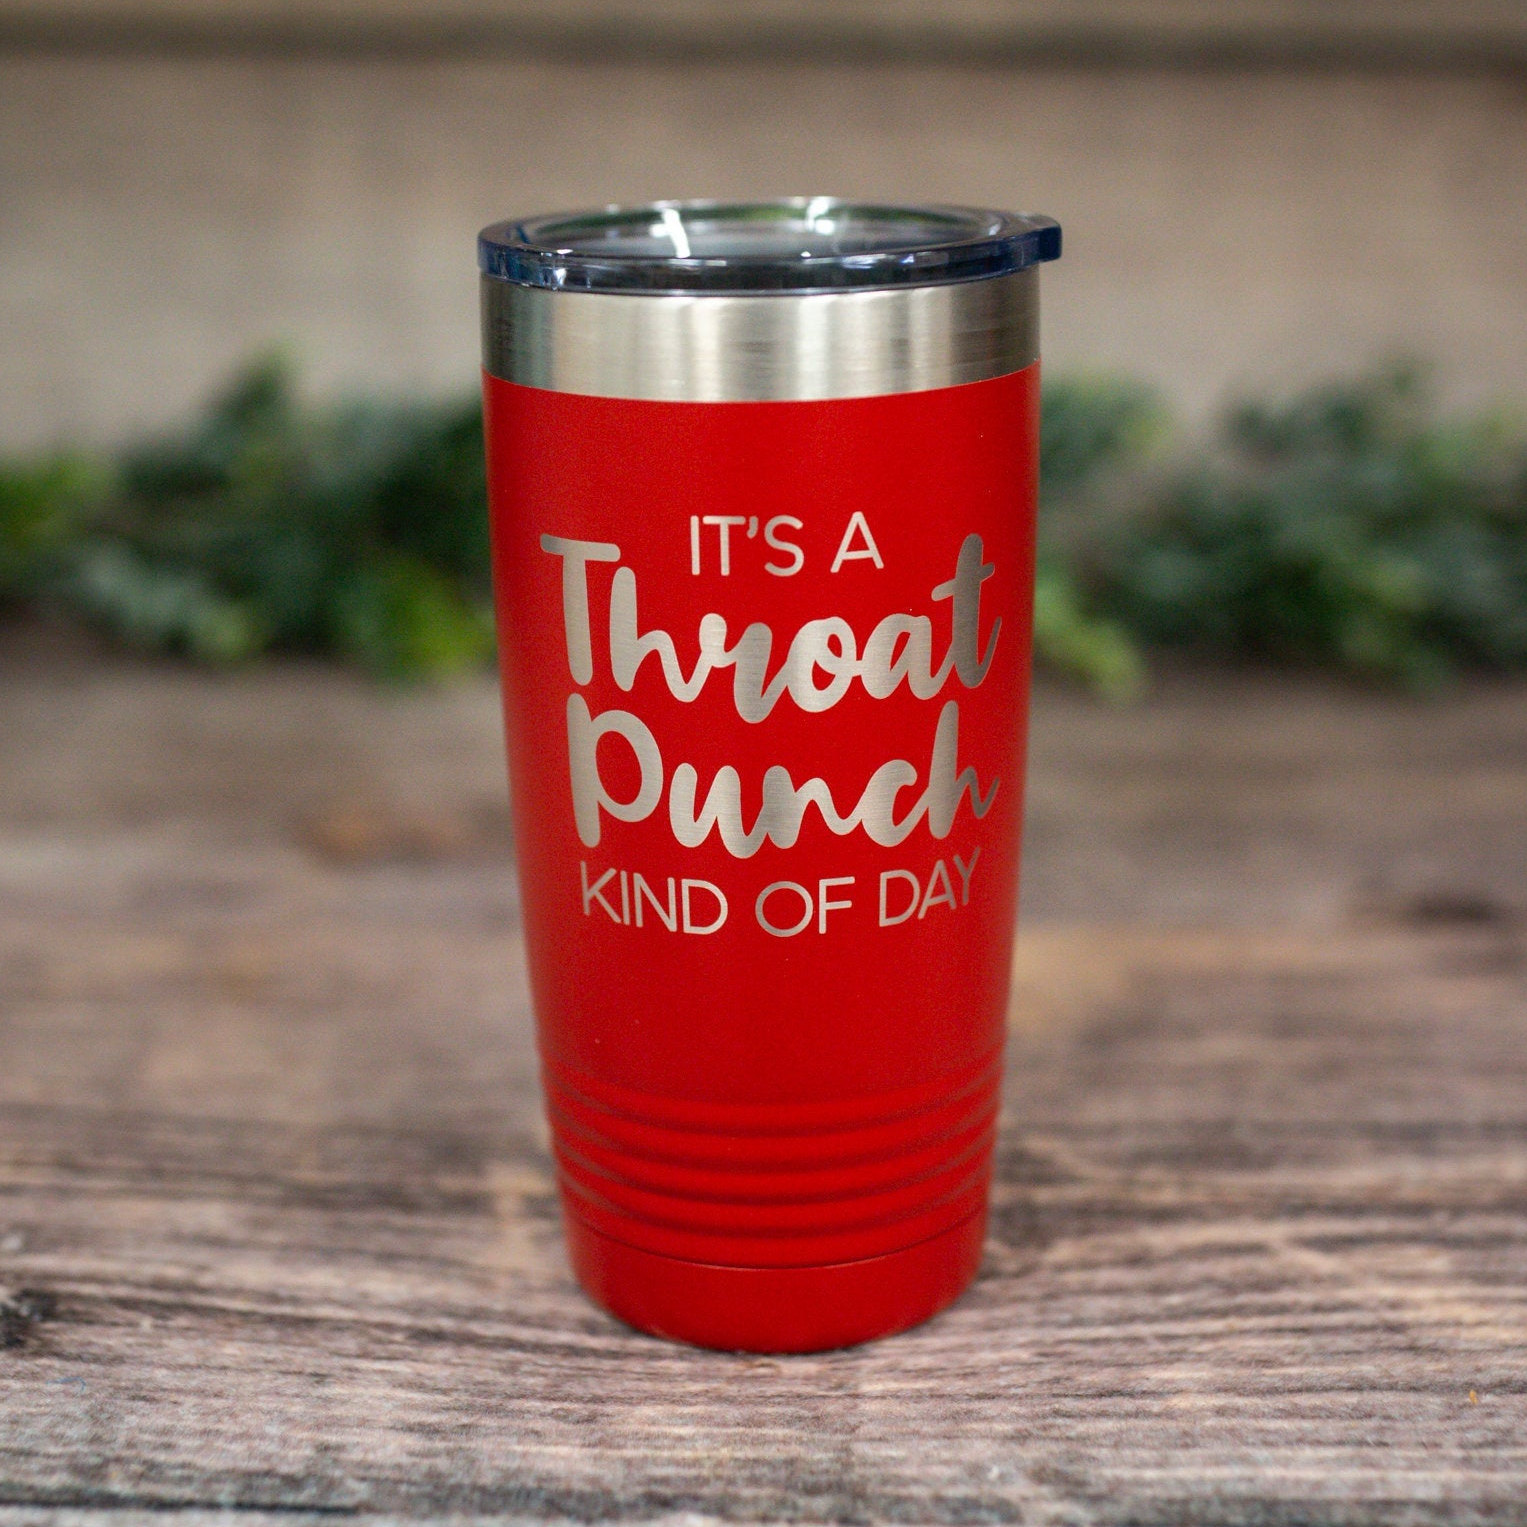 https://3cetching.com/wp-content/uploads/2021/07/its-a-throat-punch-kind-of-day-engraved-stainless-steel-tumbler-funny-gift-for-men-personalized-tumbler-for-him-60f75fa1.jpg